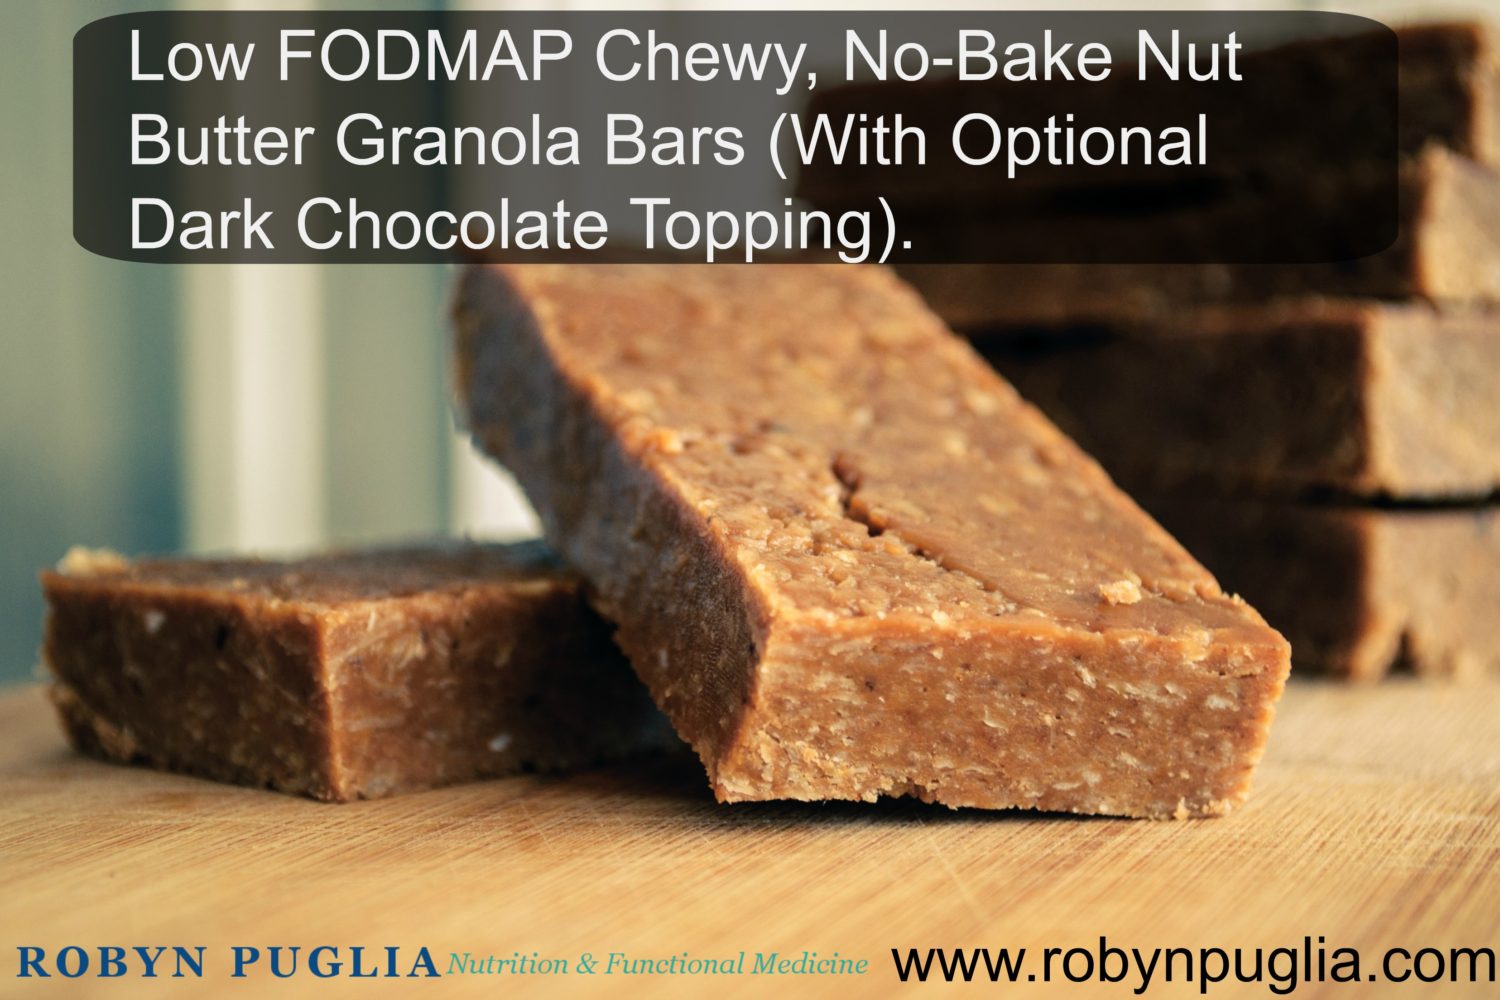 Low FODMAP Chewy No Bake Nut Butter Bars